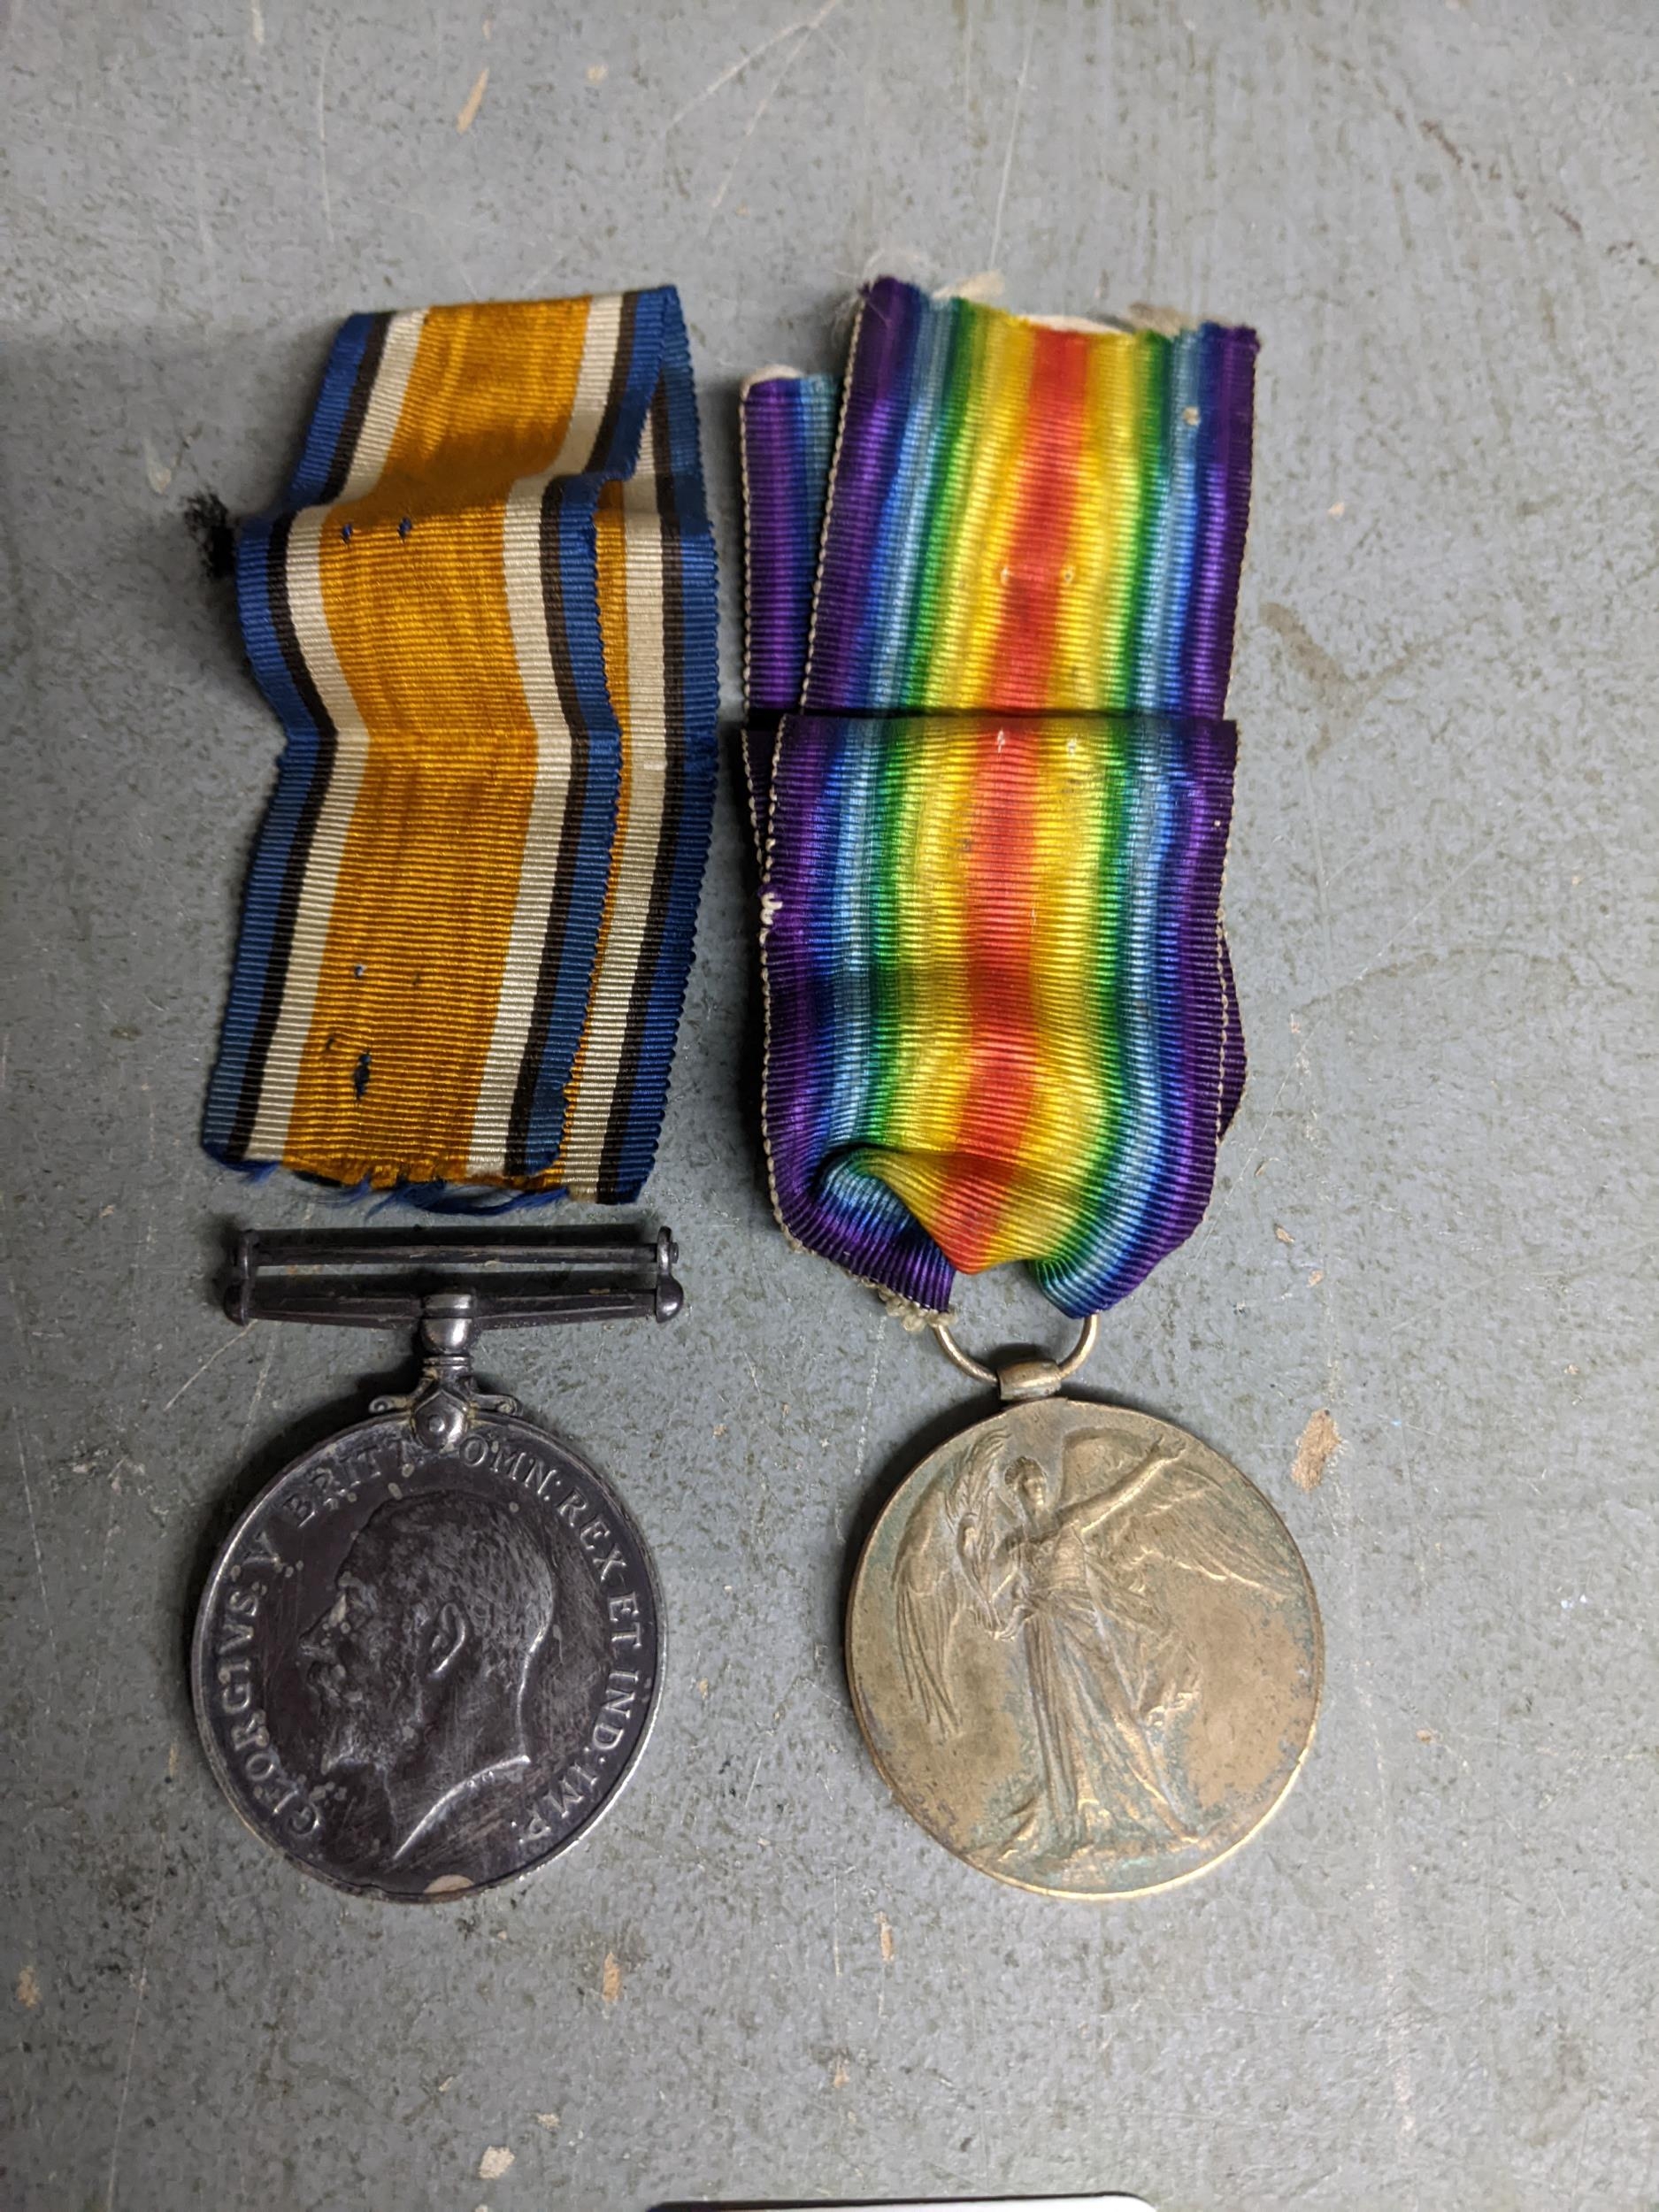 Two 1st world war BWM and Victory medal campaign group ribbons, named to GS -78643Pte G Graver, - Image 2 of 4